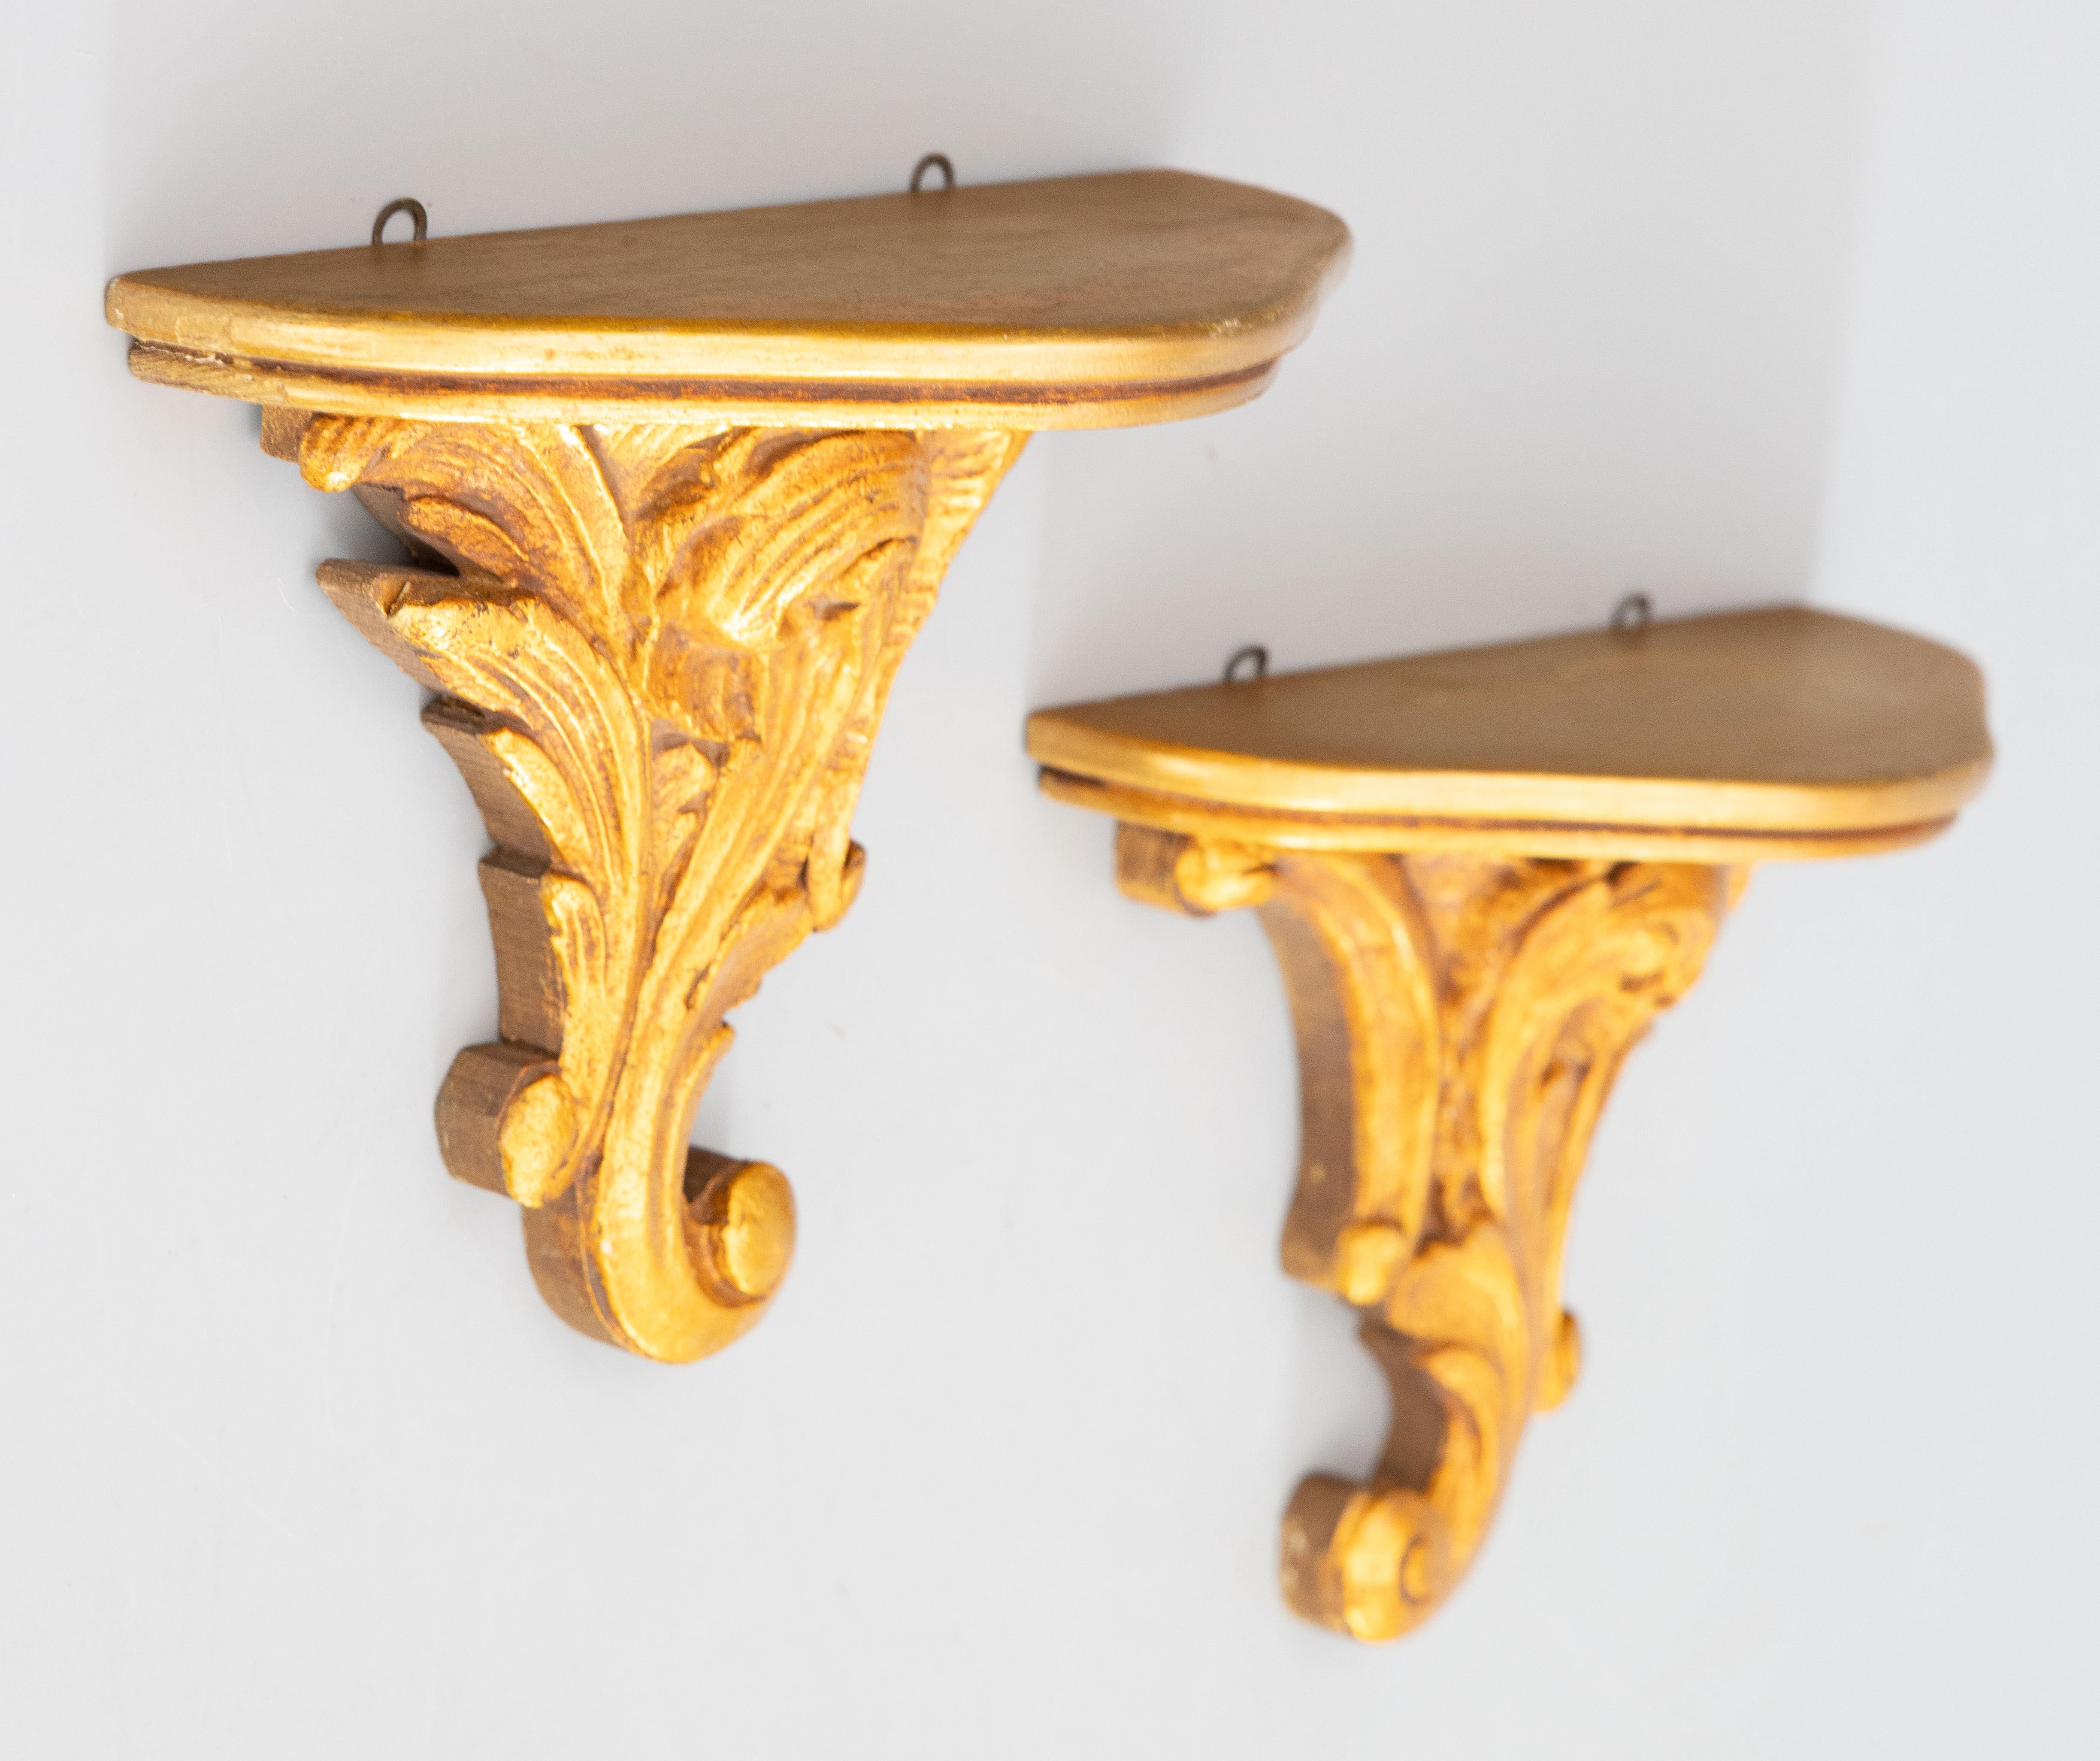 Pair of Mid-20th Century Italian Giltwood & Gesso Wall Brackets Shelves For Sale 2